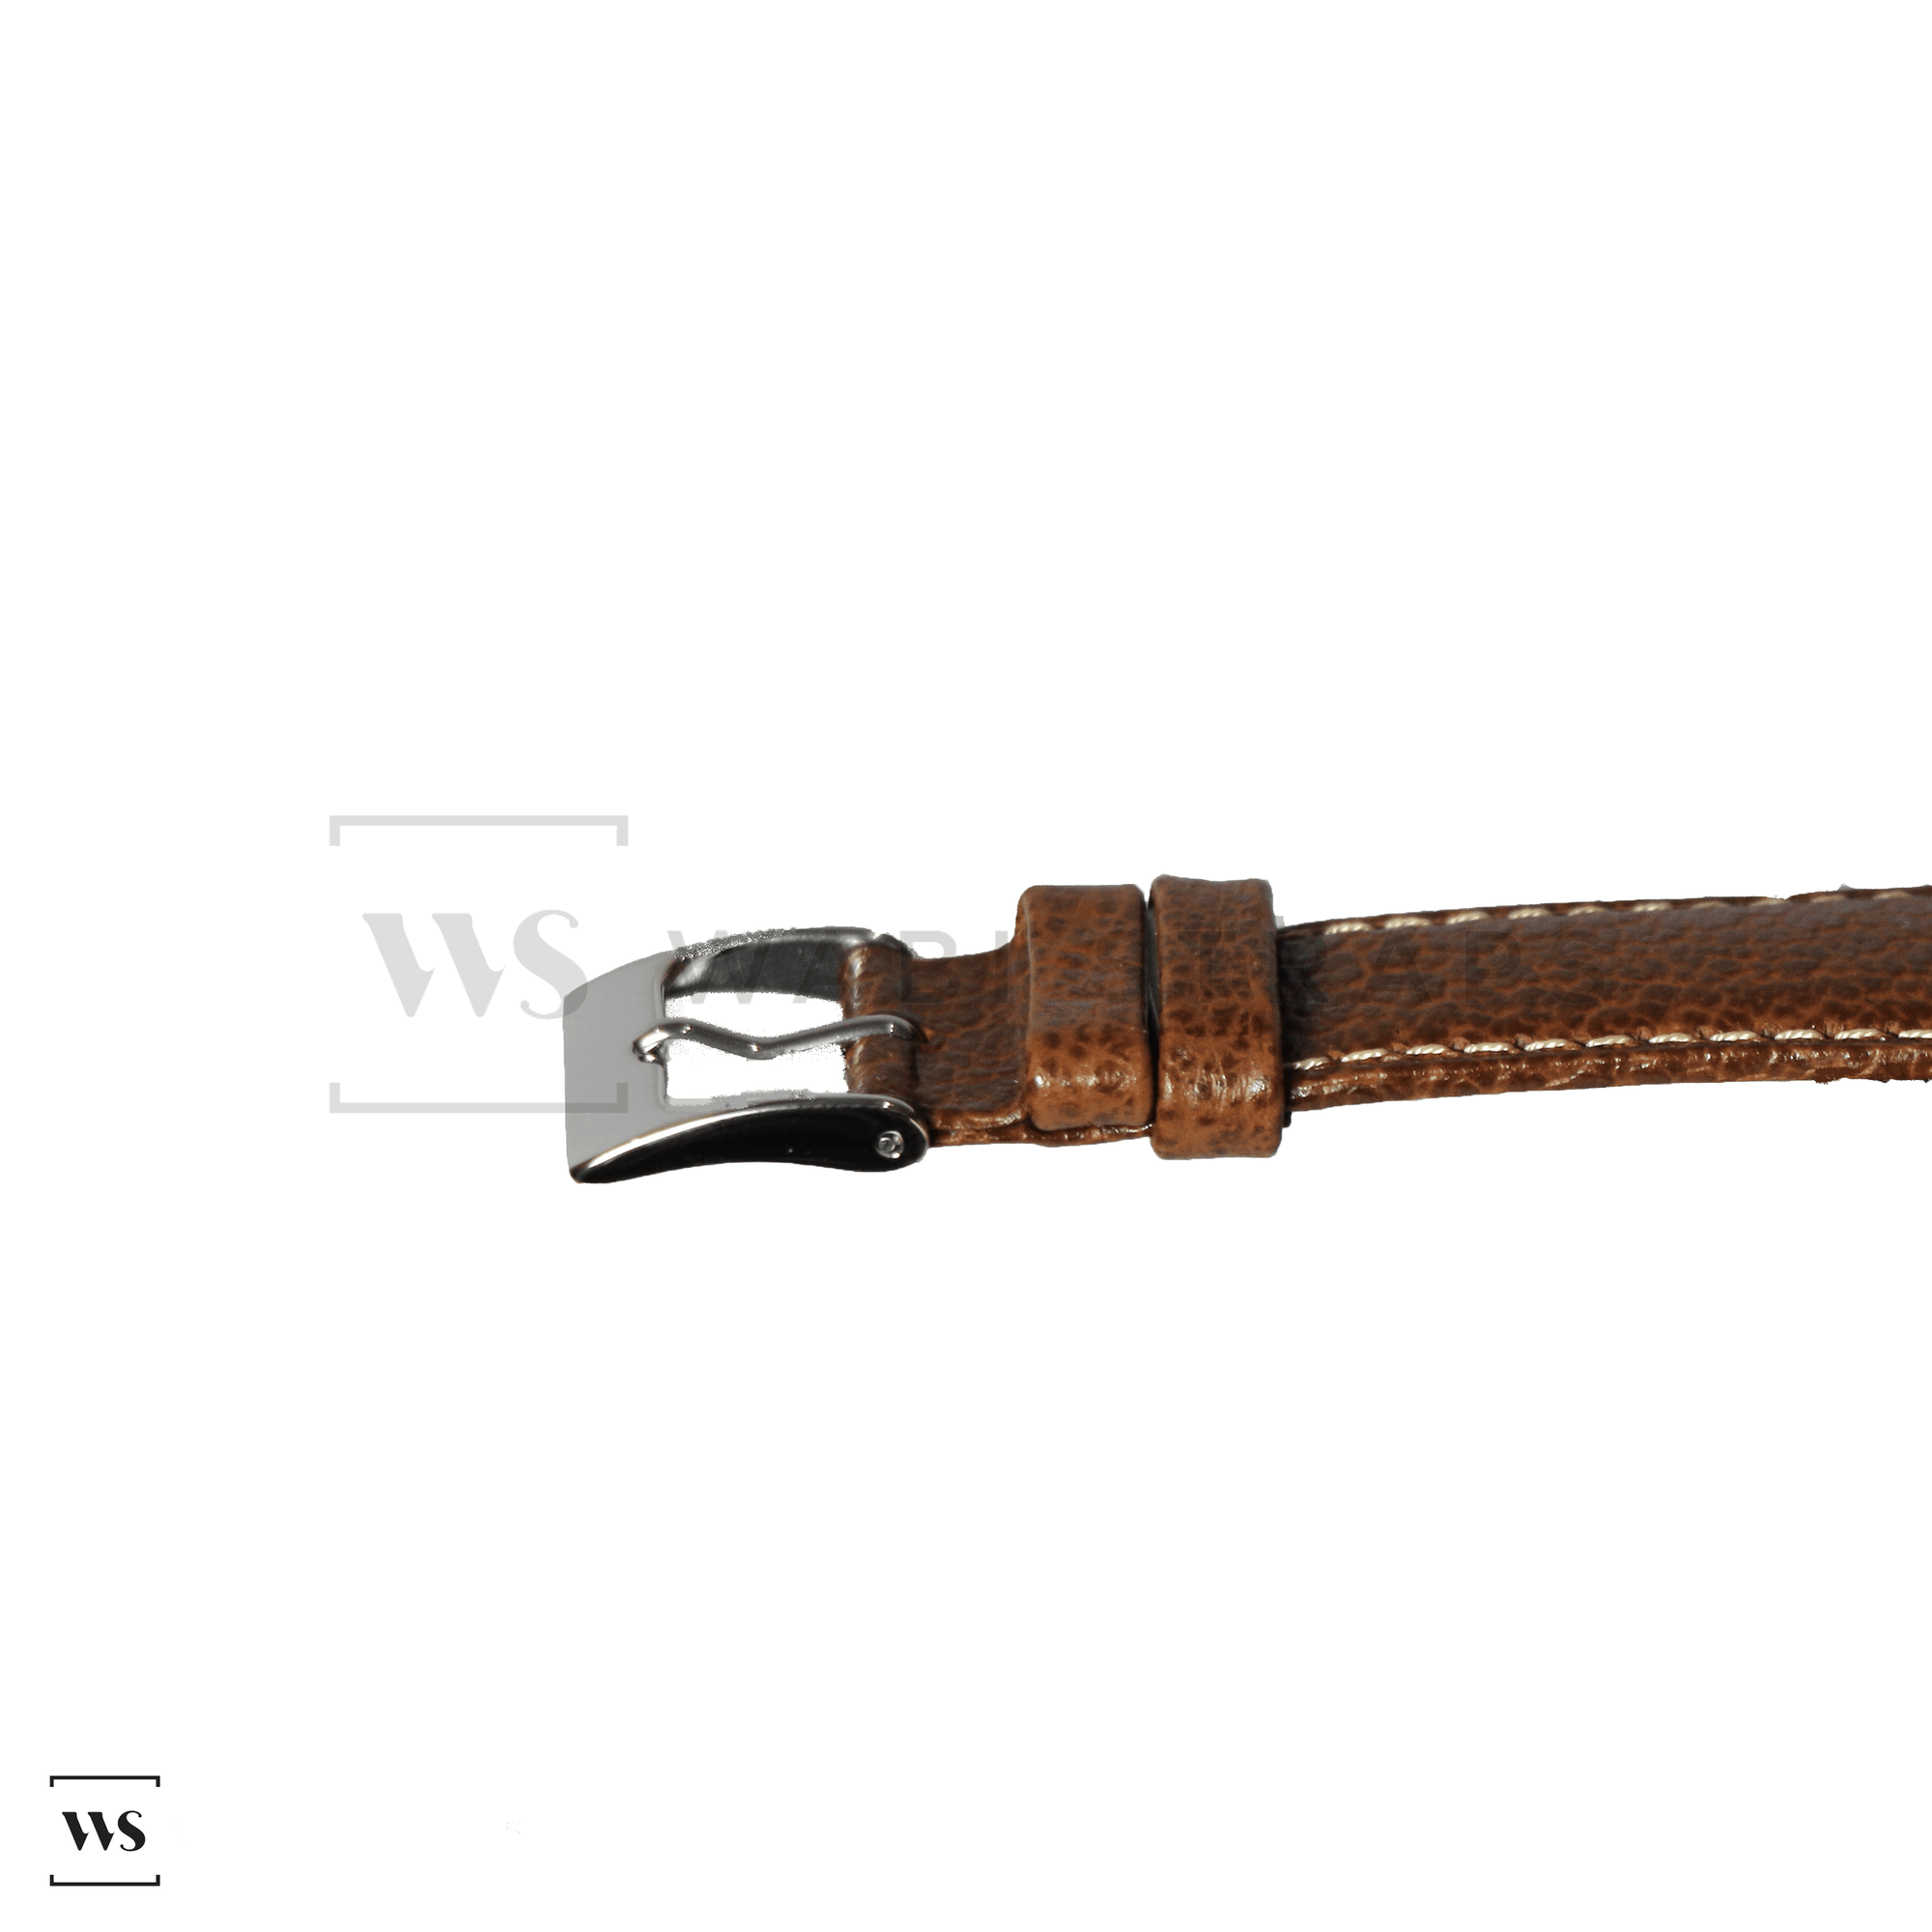 Brown Pebbled Leather Watch Strap Front